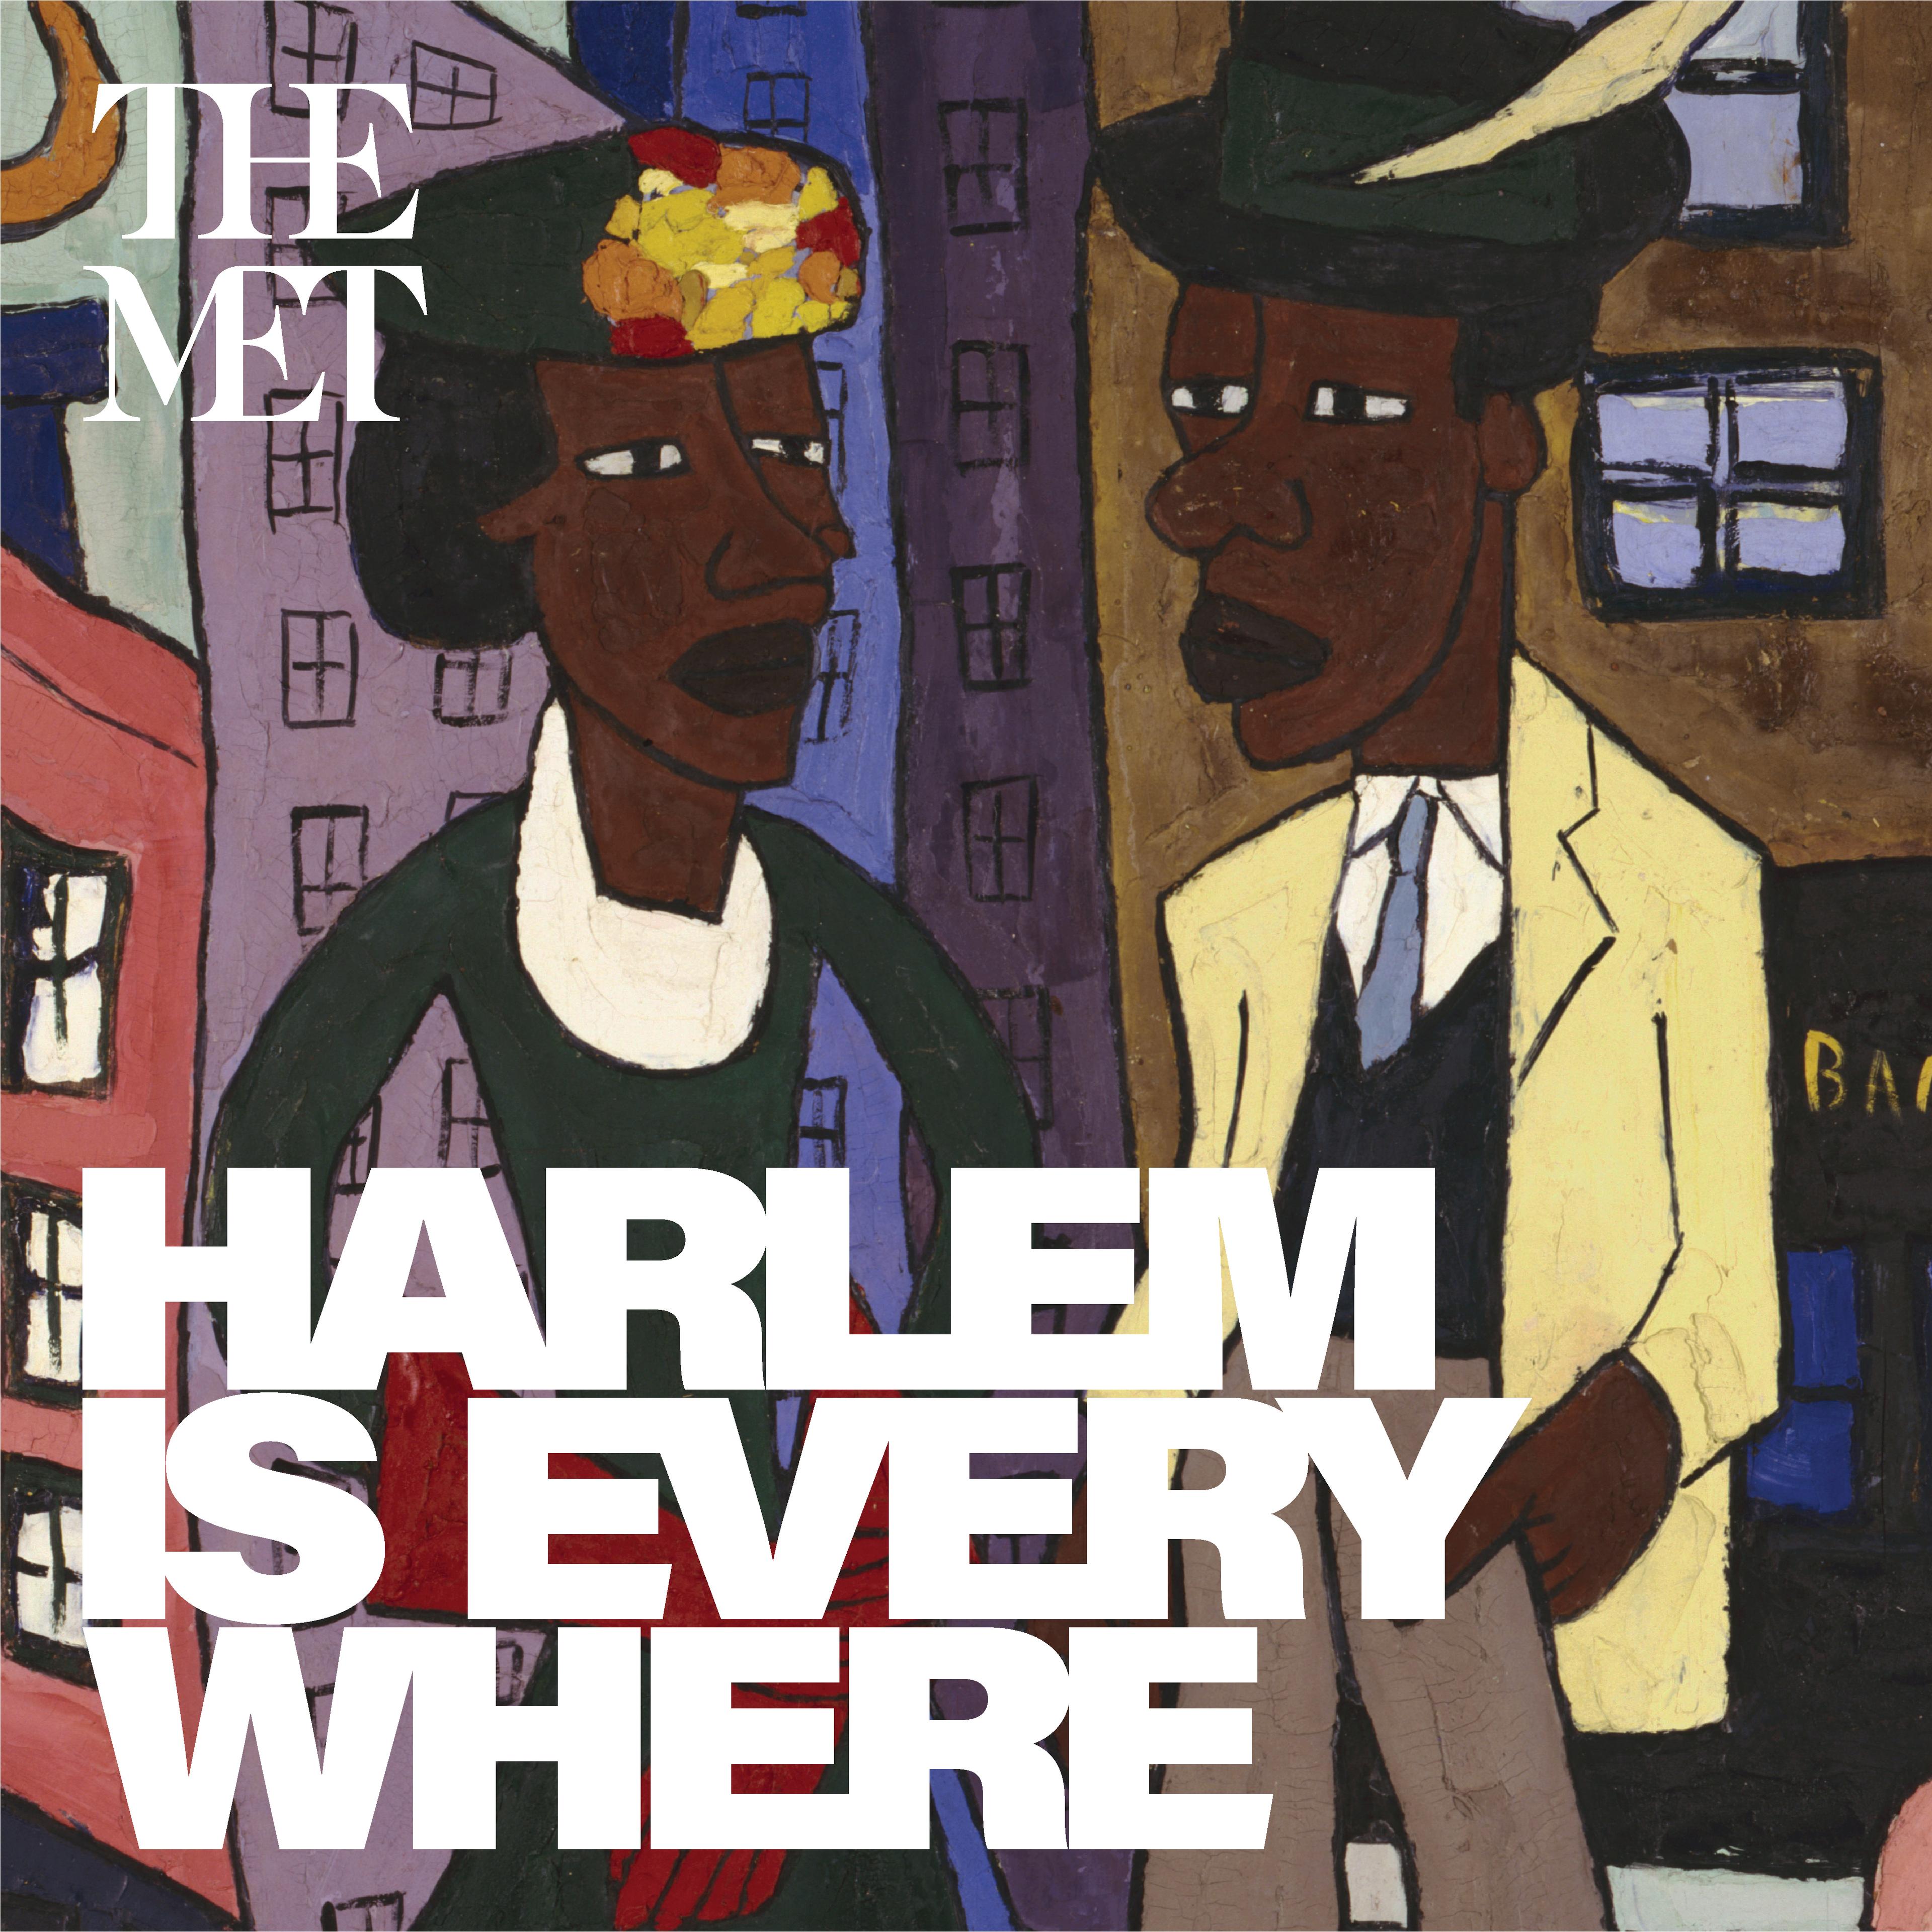 Series art for the podcast "Harlem Is Everywhere," featuring William H. John's portrait of a fashionable Black couple in a cityscape titled, "Street Life, Harlem"